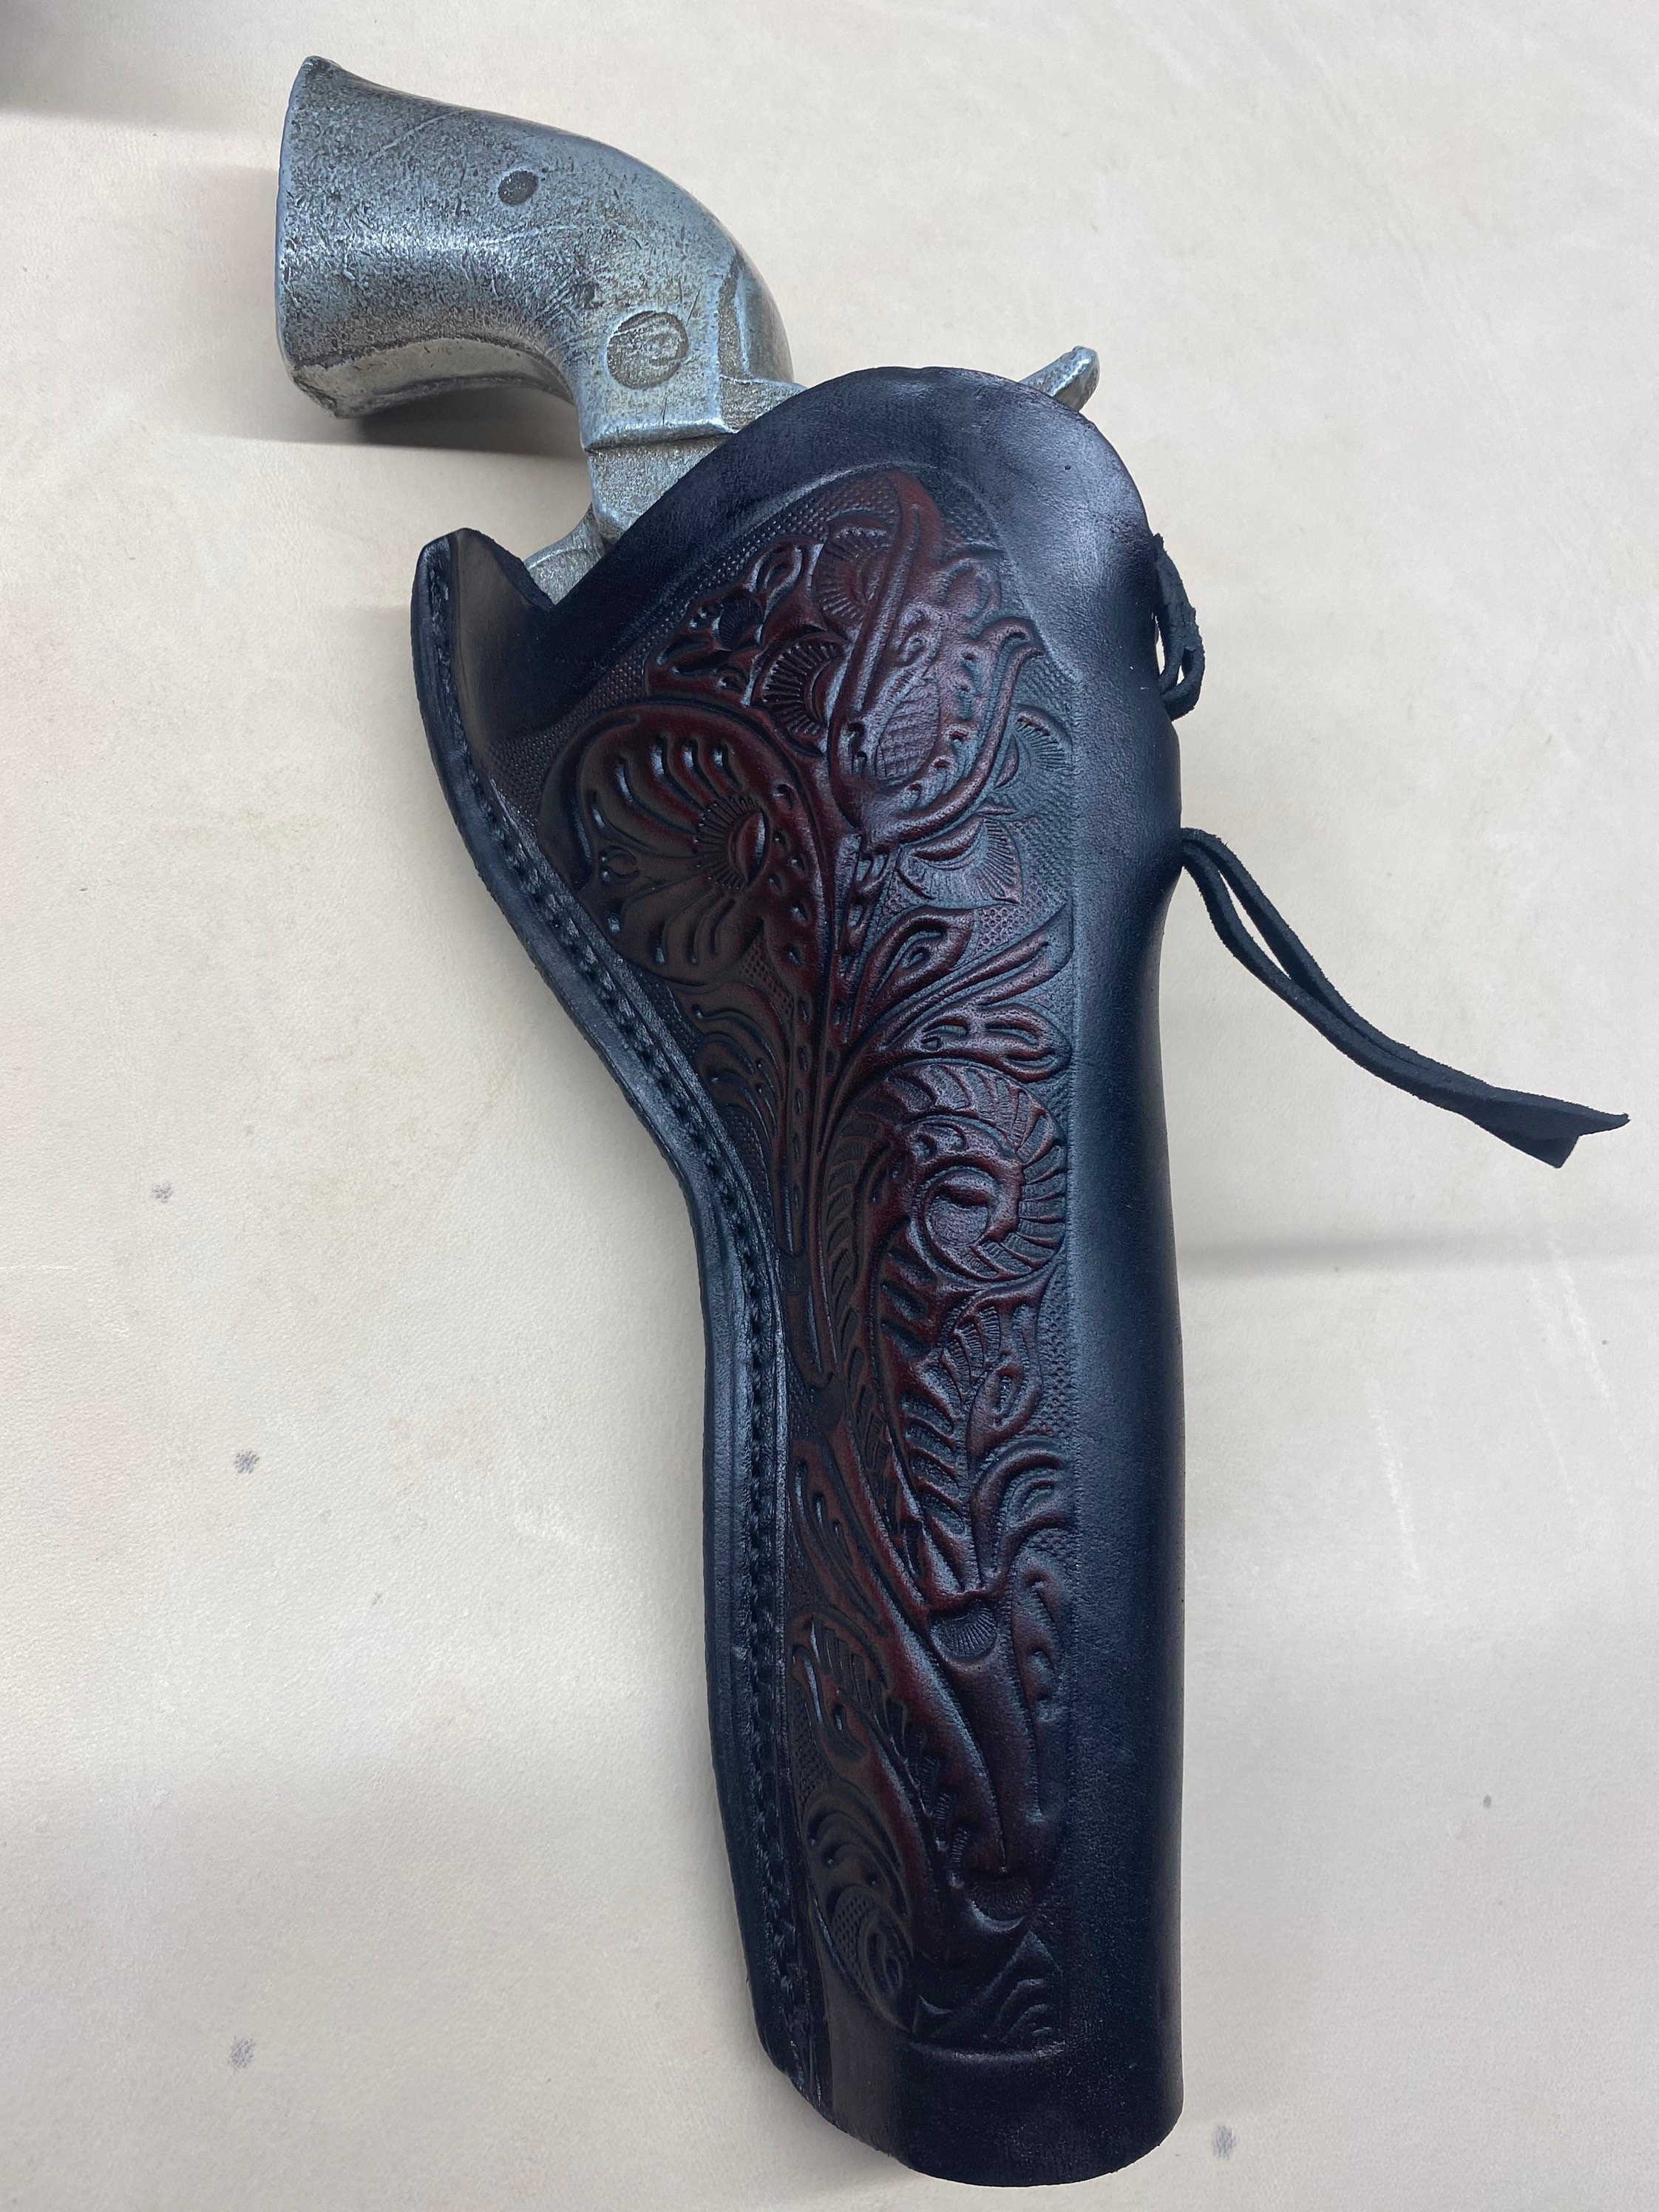 Colt Single Action Army / Clone 7 1/2 Leather Holster 